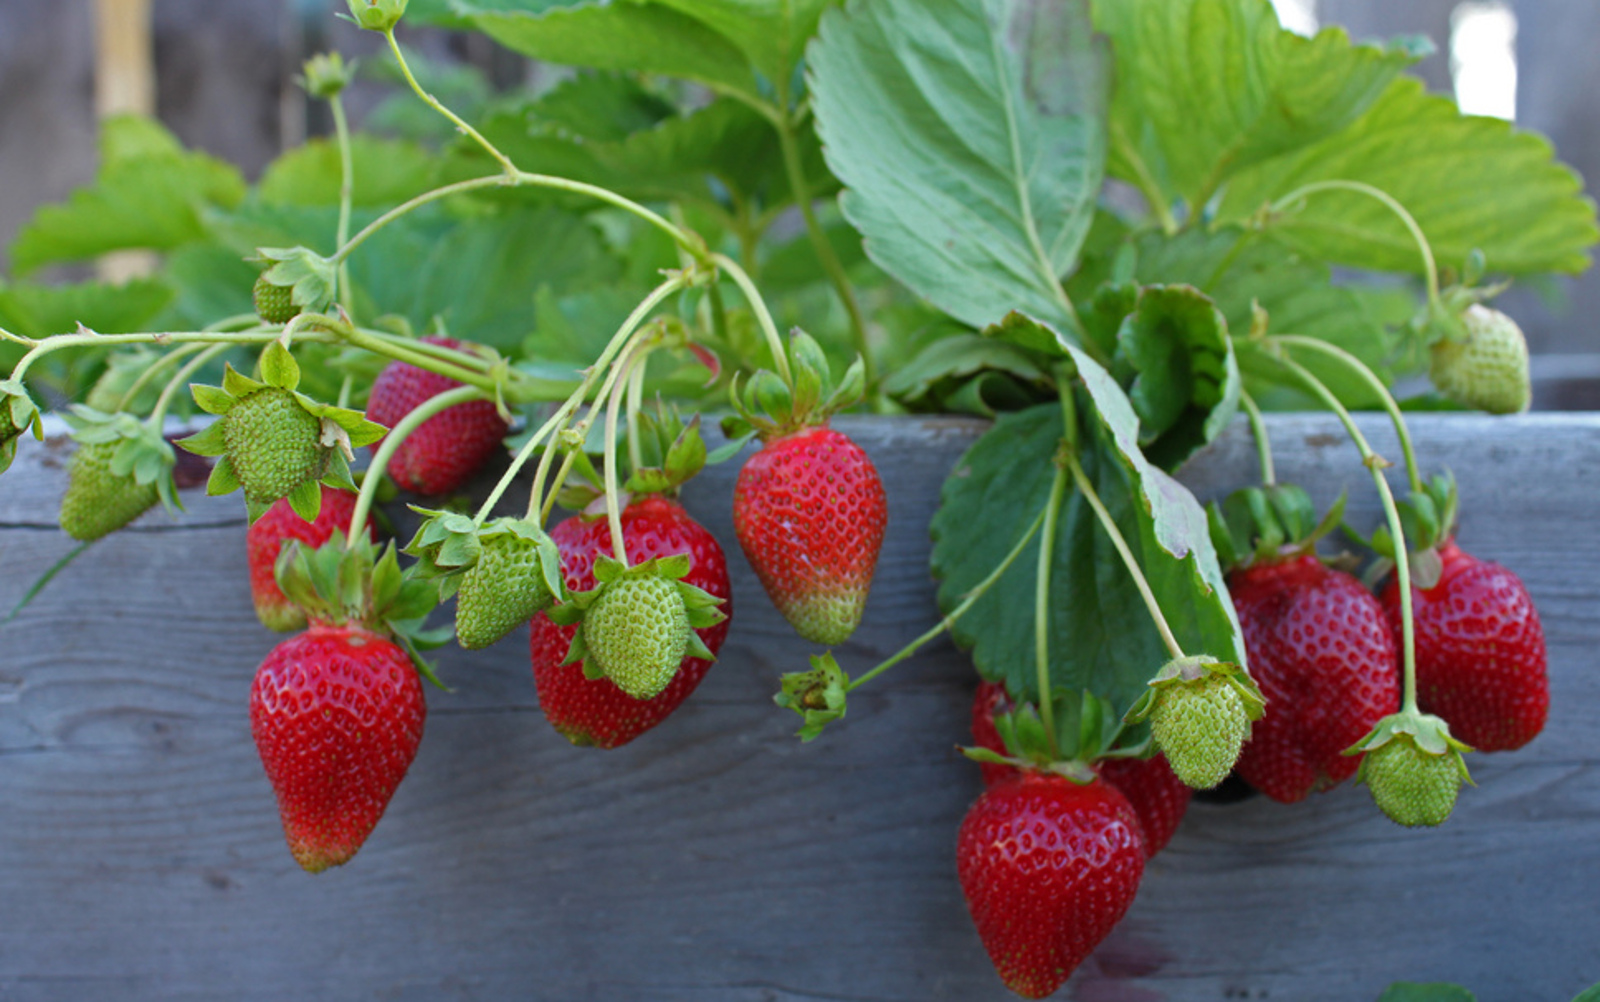 Strawberries growing with green leaves